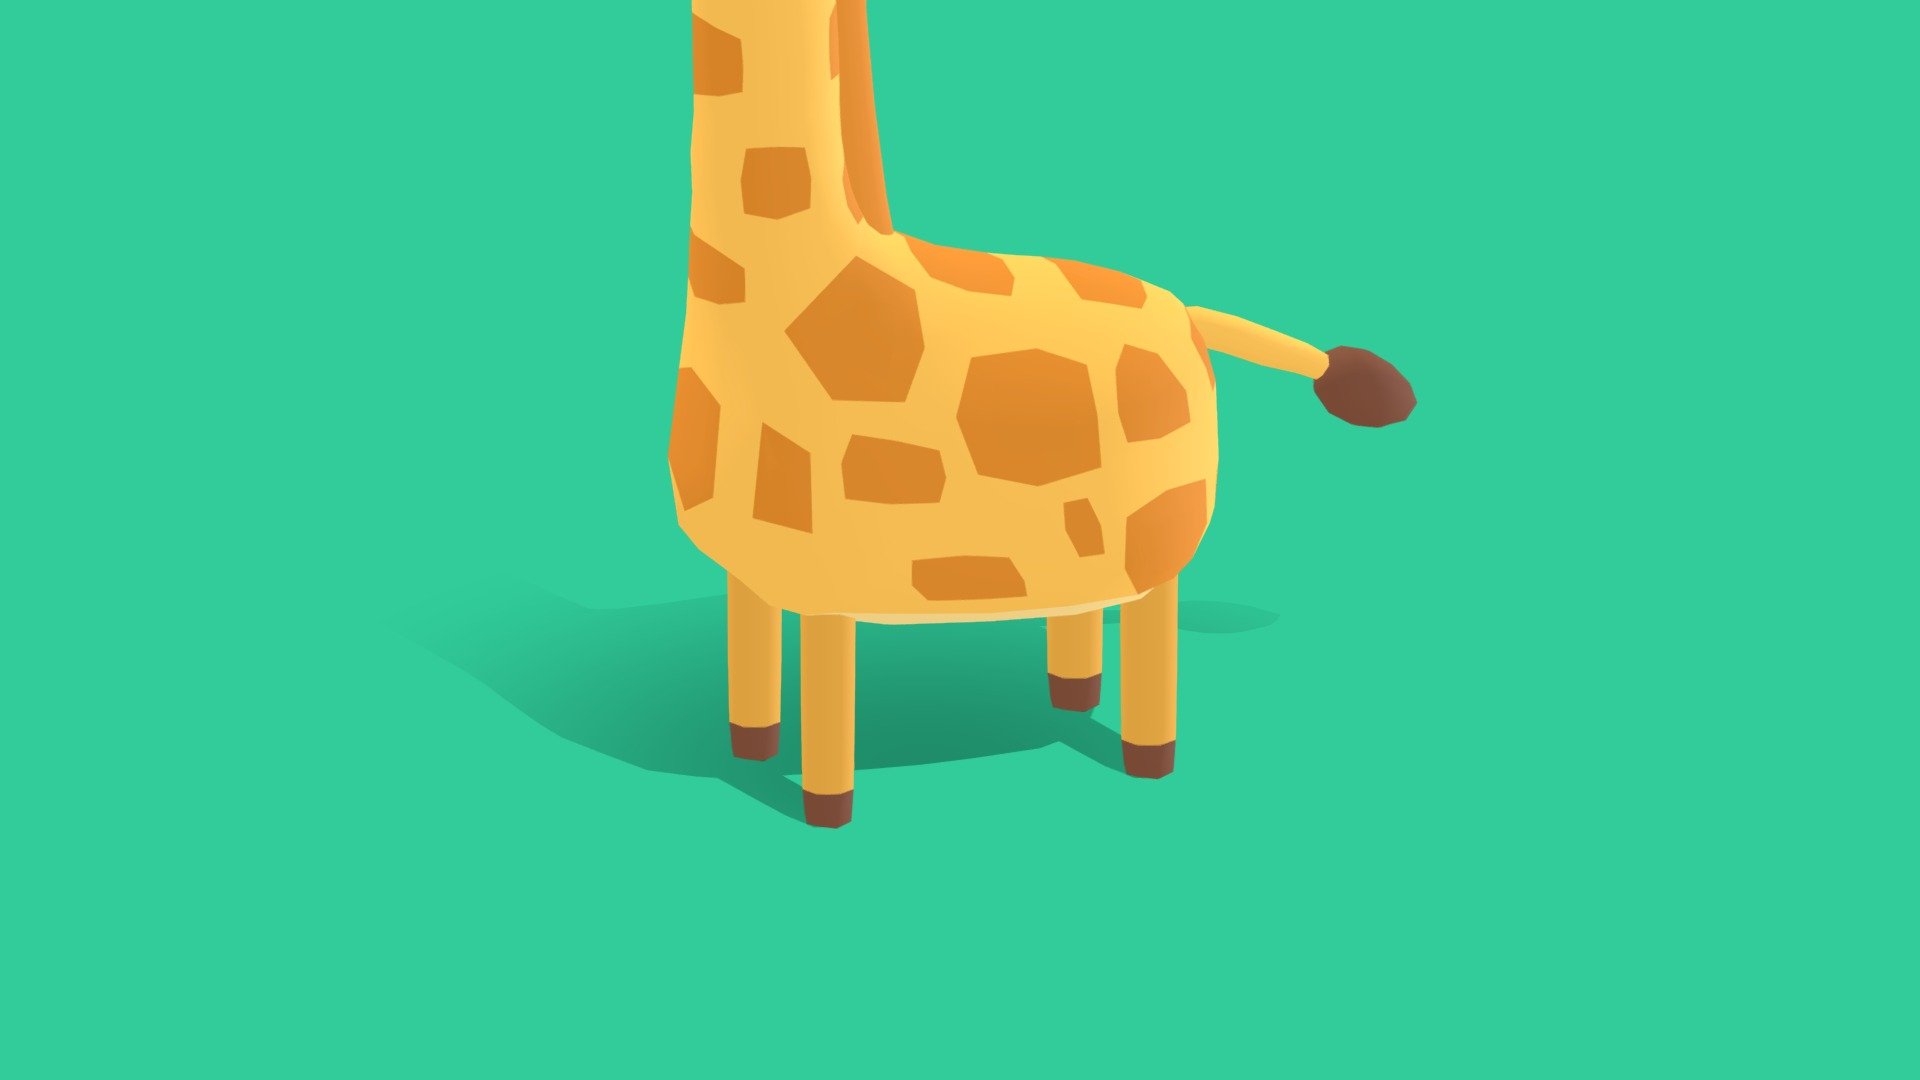 Grace The Giraffe Quirky Series Buy Royalty Free 3d Model By Omabuarts Studio Omabuarts 0dab4f2